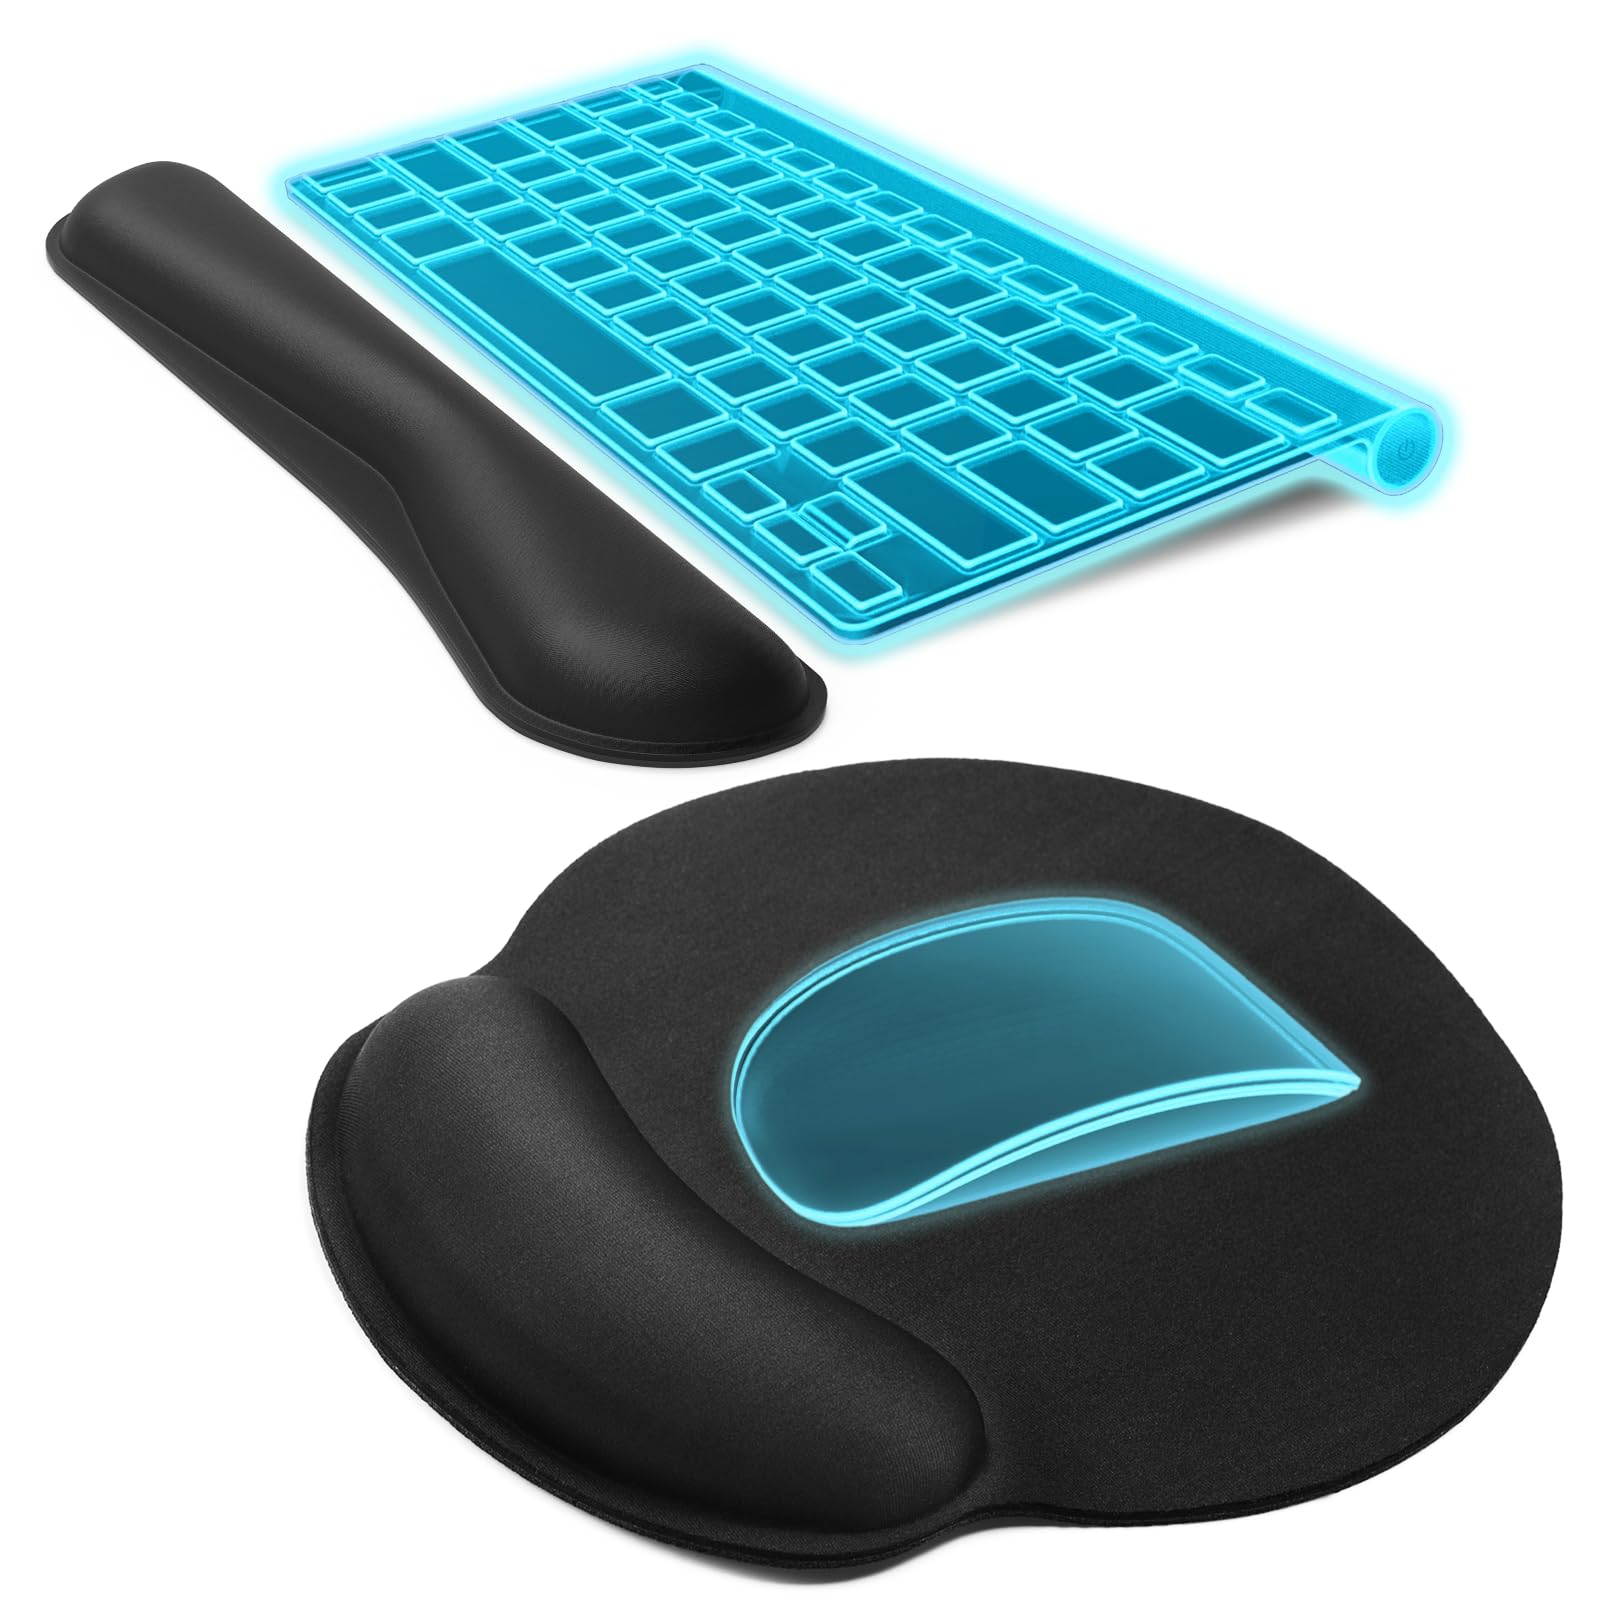 ComfortKey Pro: The Ultimate Wrist Rest for Keyboard Warriors